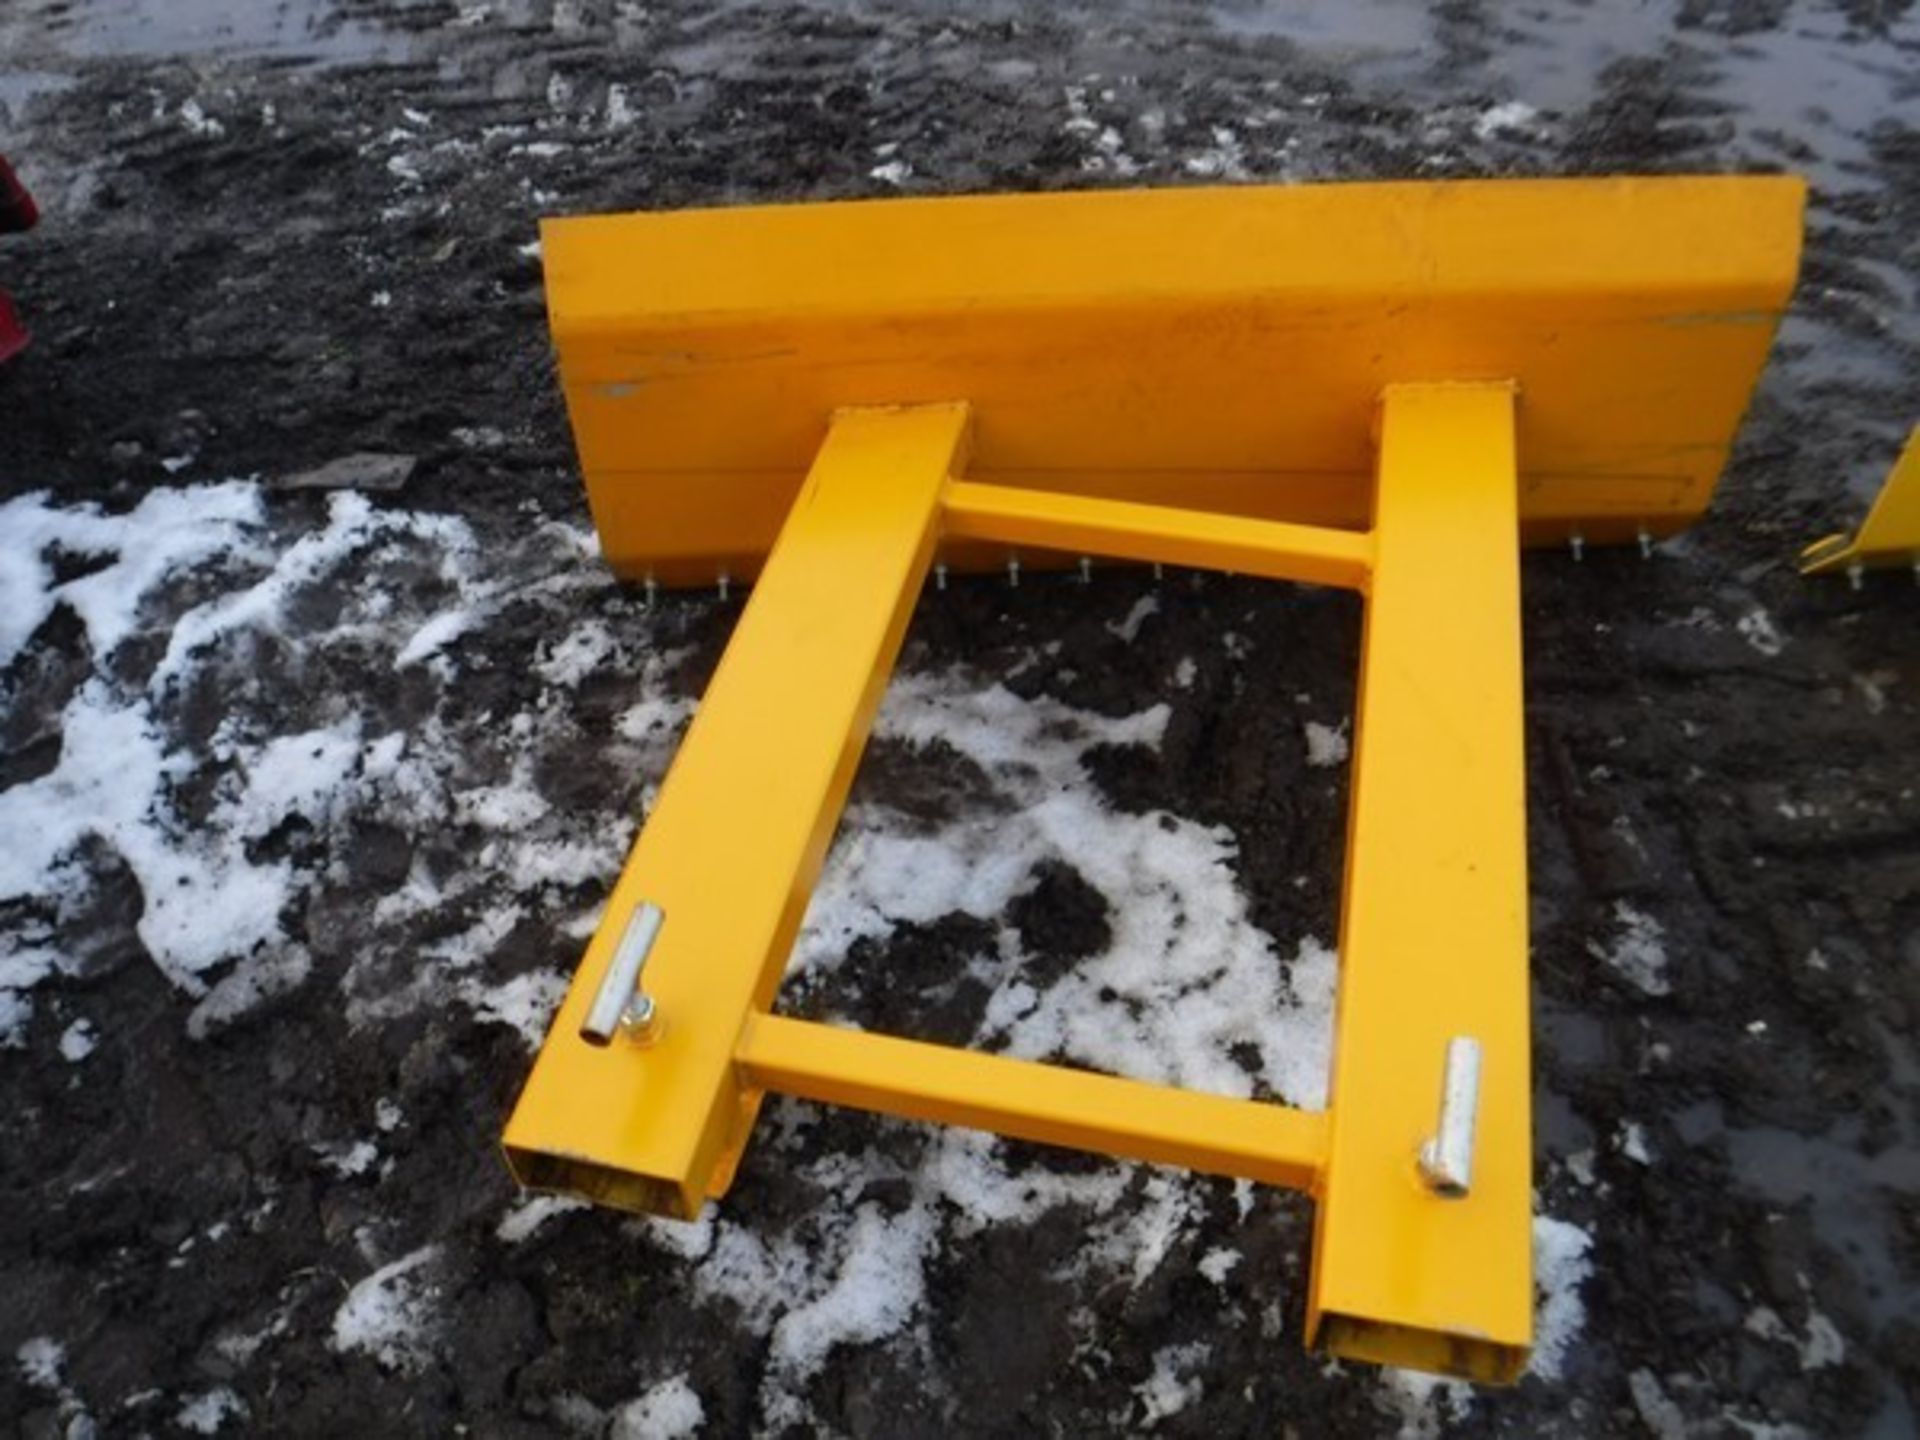 5FT SNOW PLOUGH/YARN SCRAPER FORK ATTACHMENT WITH HEAVY DUTY REVERSIBLE RUBBER WEAR PAN - Image 2 of 2